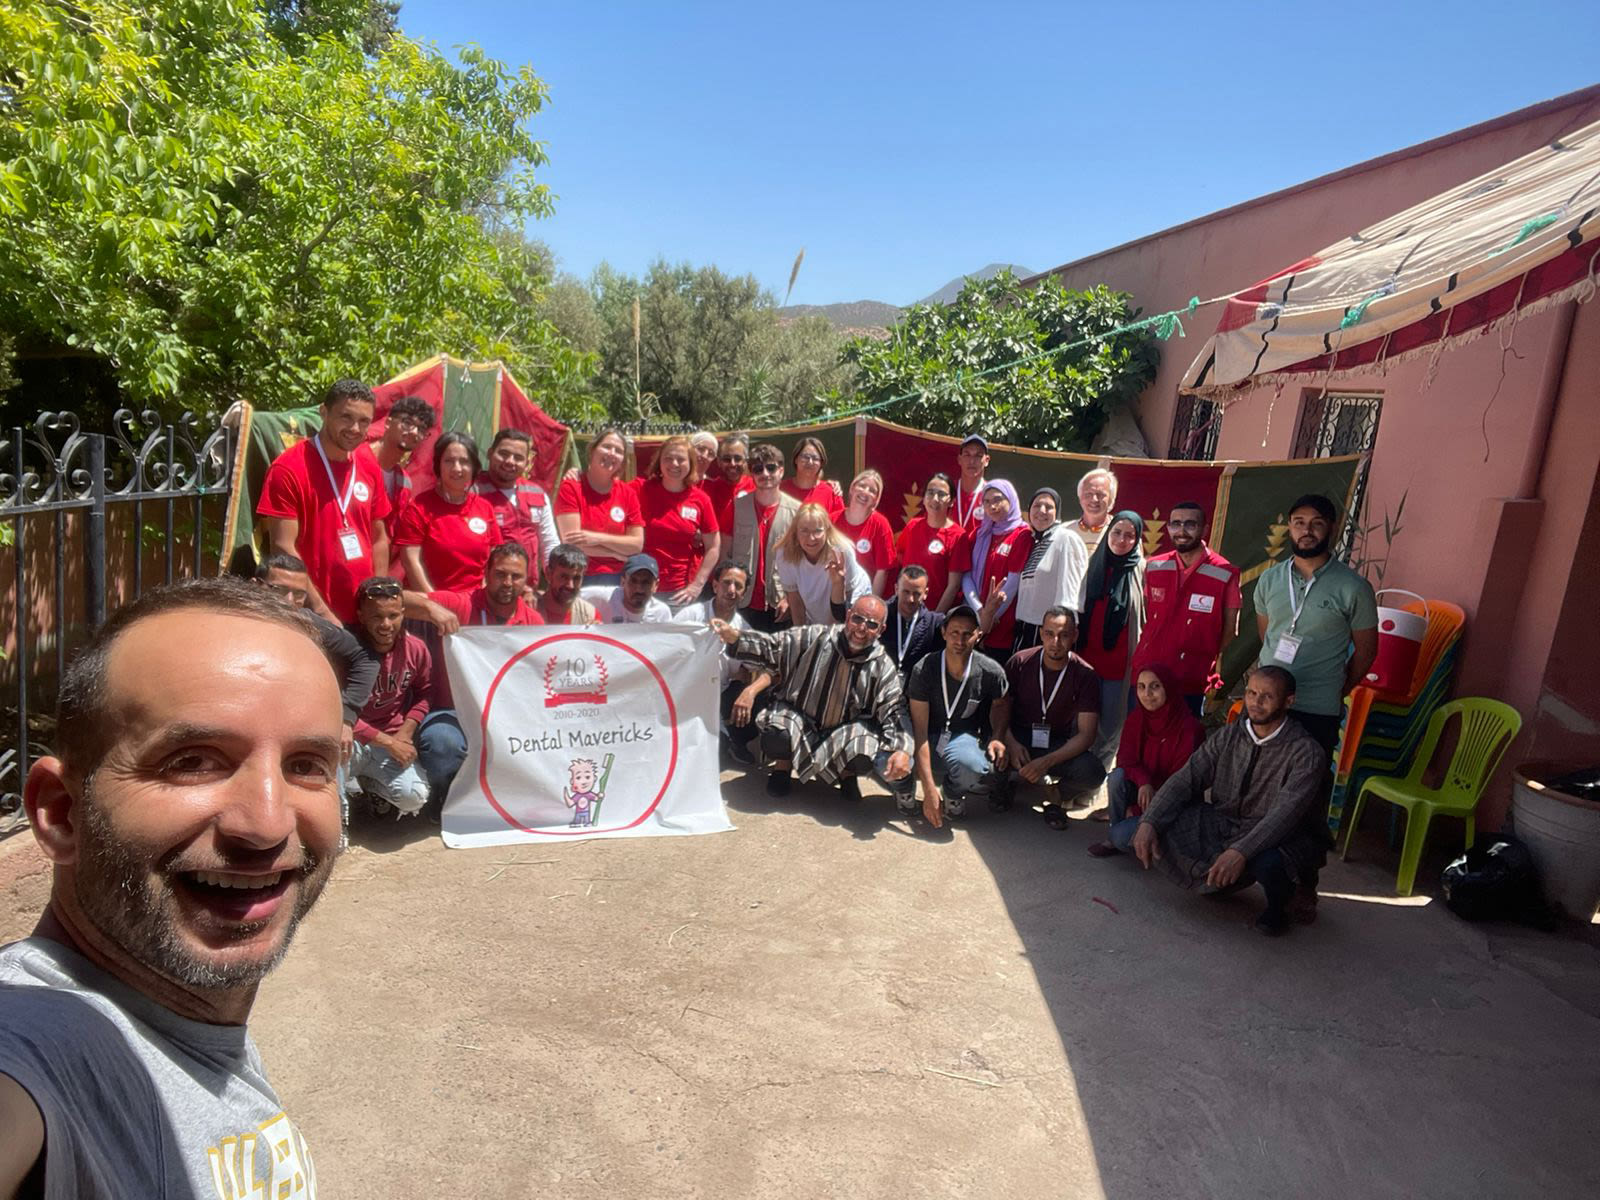 A team of volunteers from Dental Mavericks in Morocco with the Eve Branson Foundation